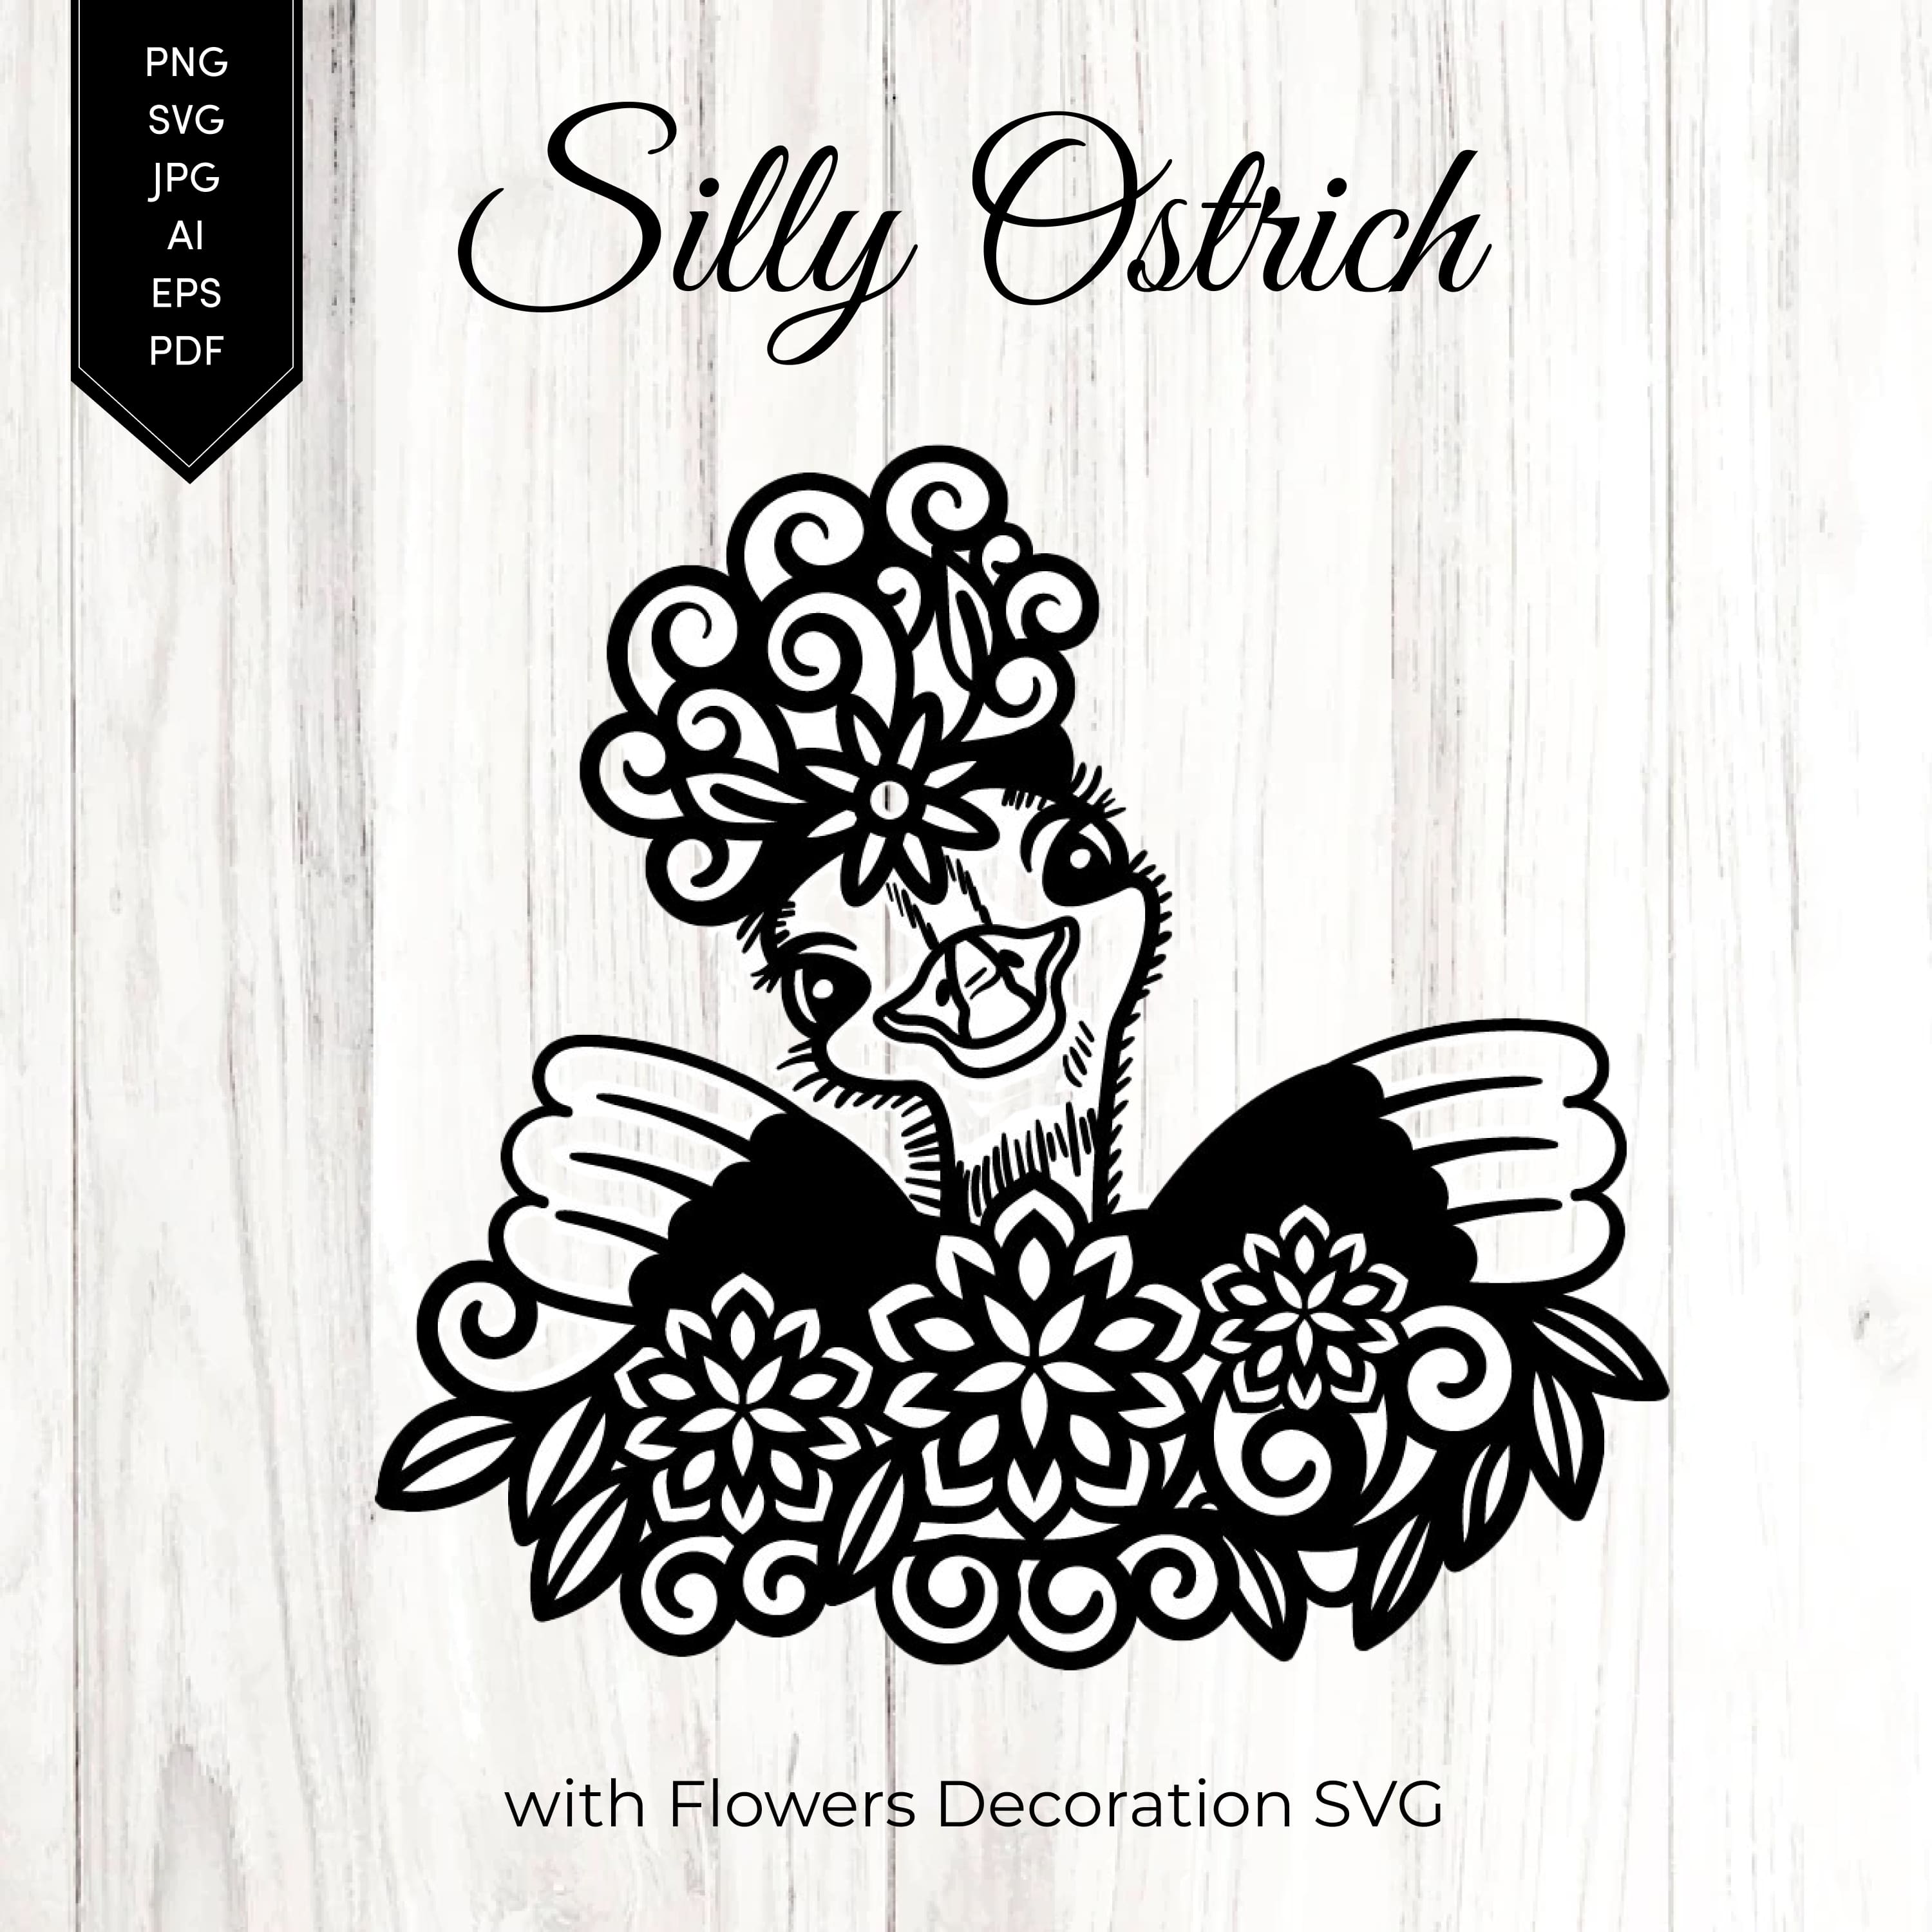 Silly Ostrich with Flowers Decoration SVG.